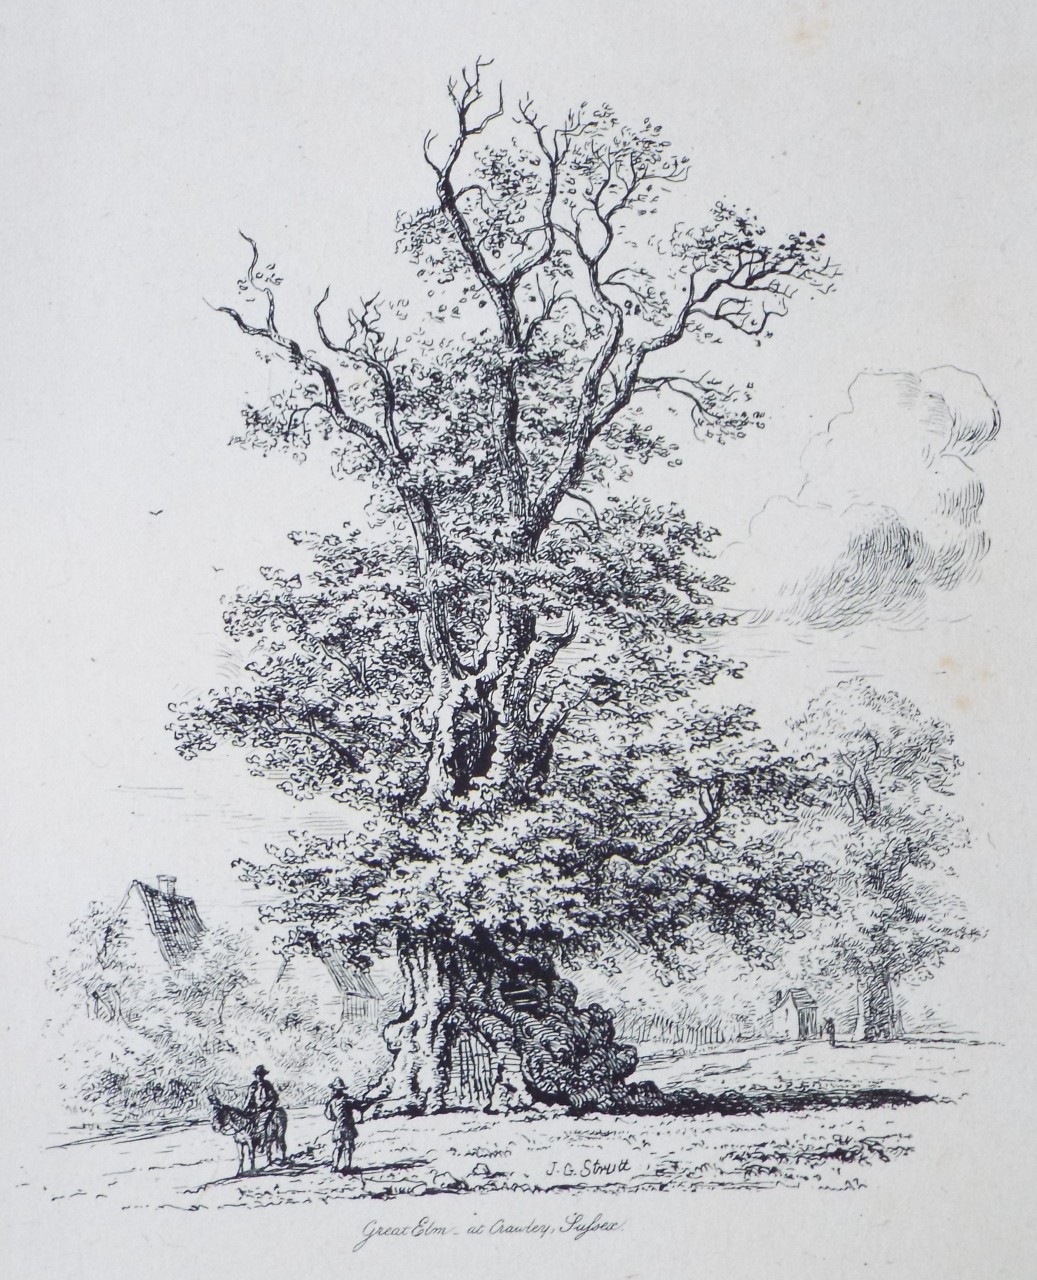 Etching - Great Elm - at Crawley, Sussex. - Strutt